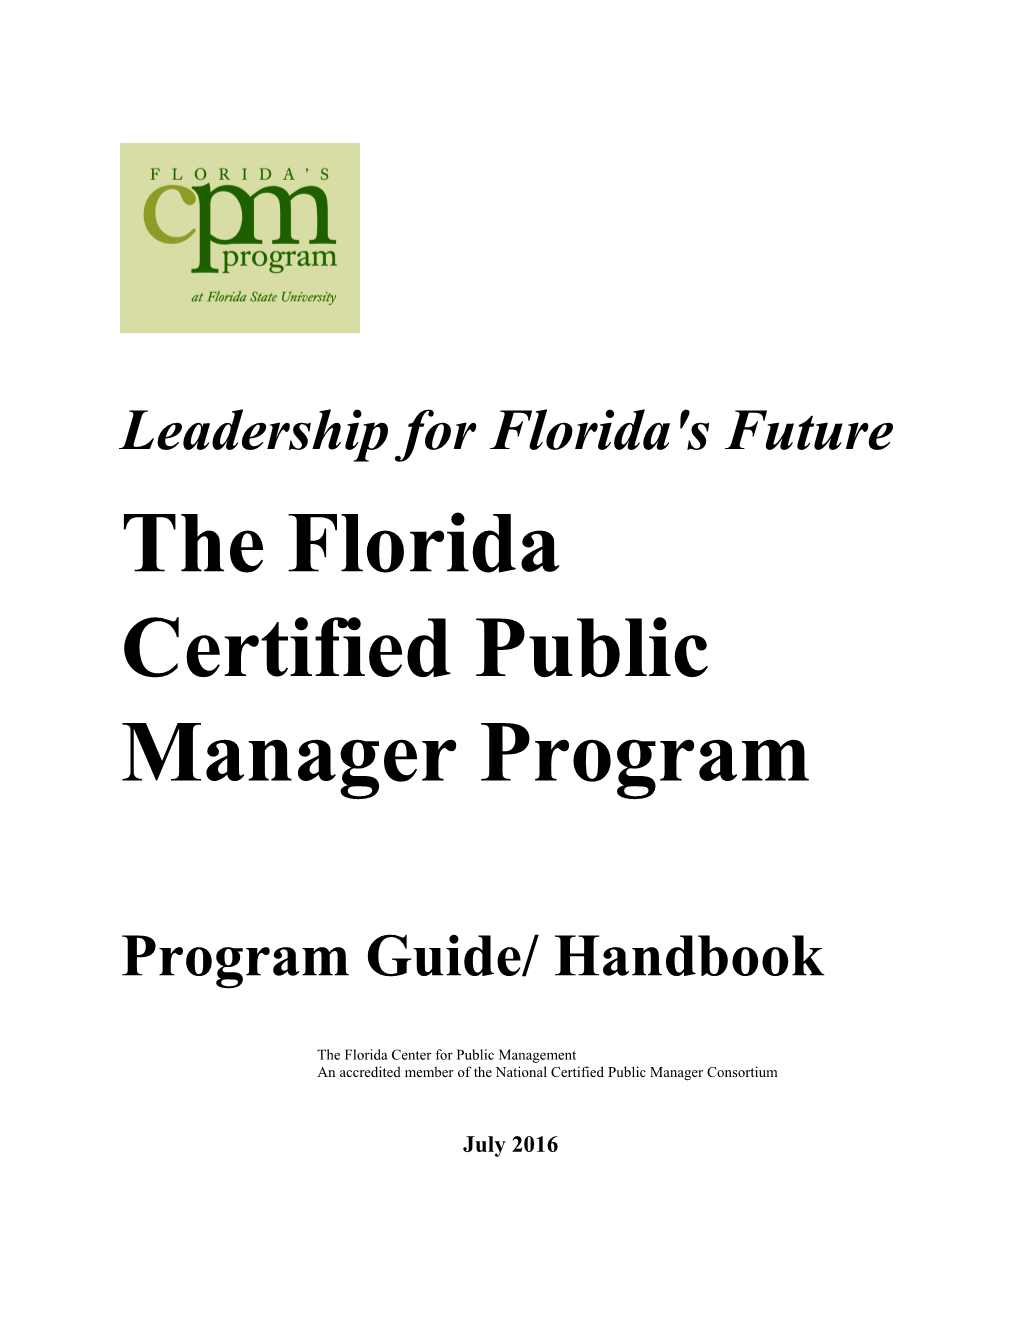 The Florida Certified Public Manager Program